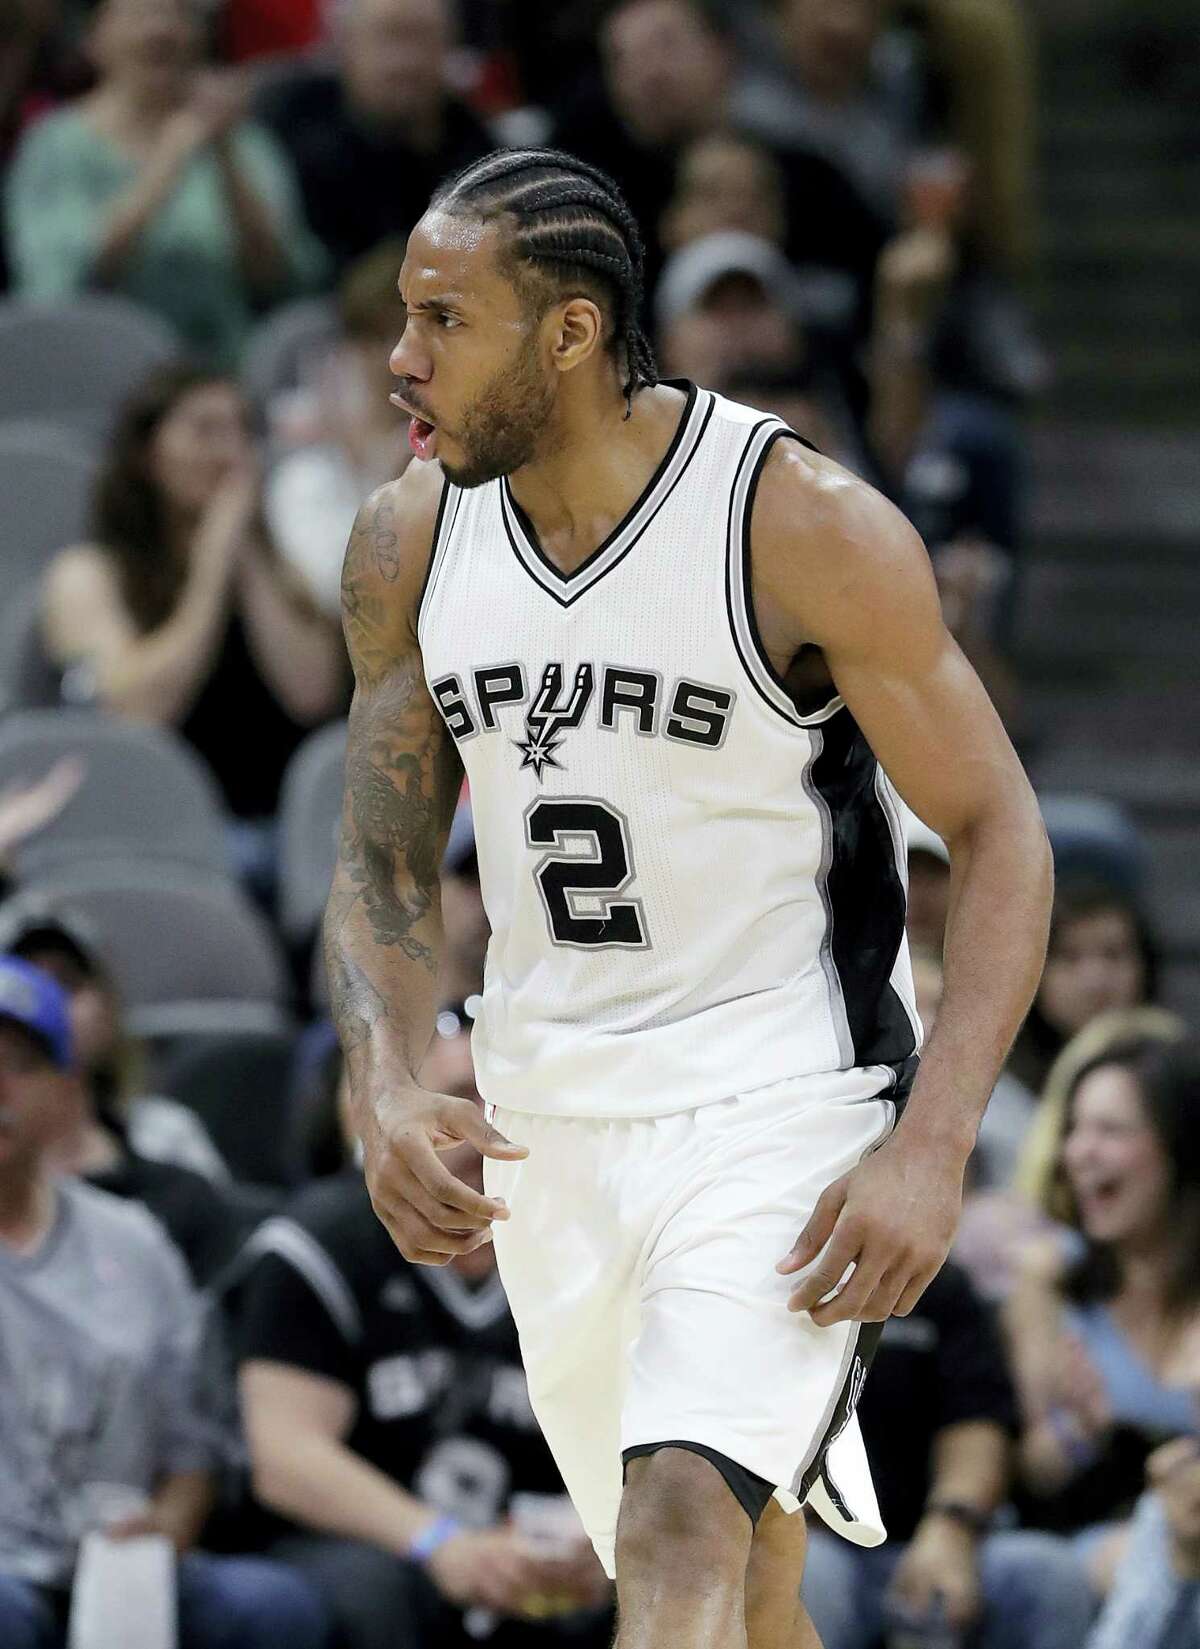 San Antonio Spurs forward Kawhi Leonard (2) reacts after scoring against the Atlanta Hawks during the second half of an NBA basketball game, on March 13, 2017 in San Antonio. Spurs won 107-99.